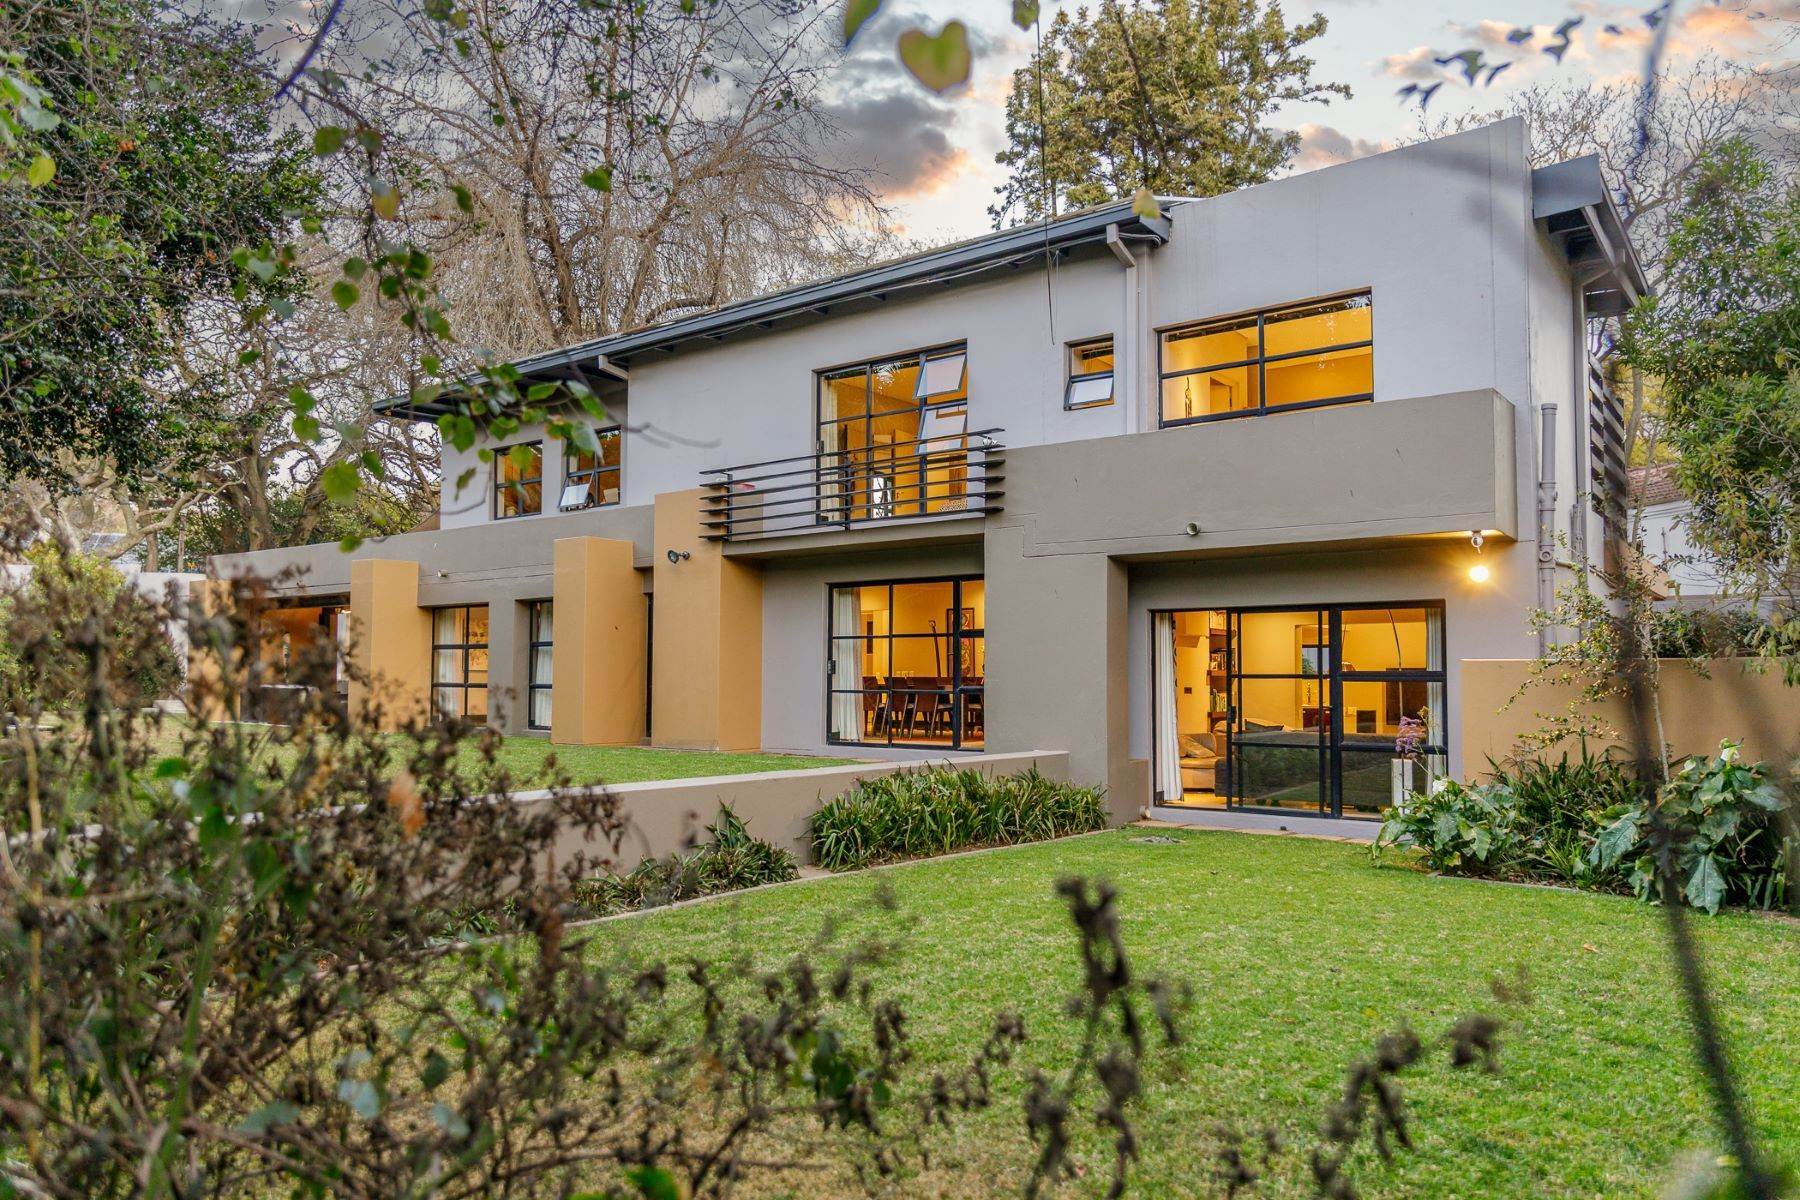 Single Family Homes for Sale at Saxonwold Saxonwold, Johannesburg, Gauteng South Africa